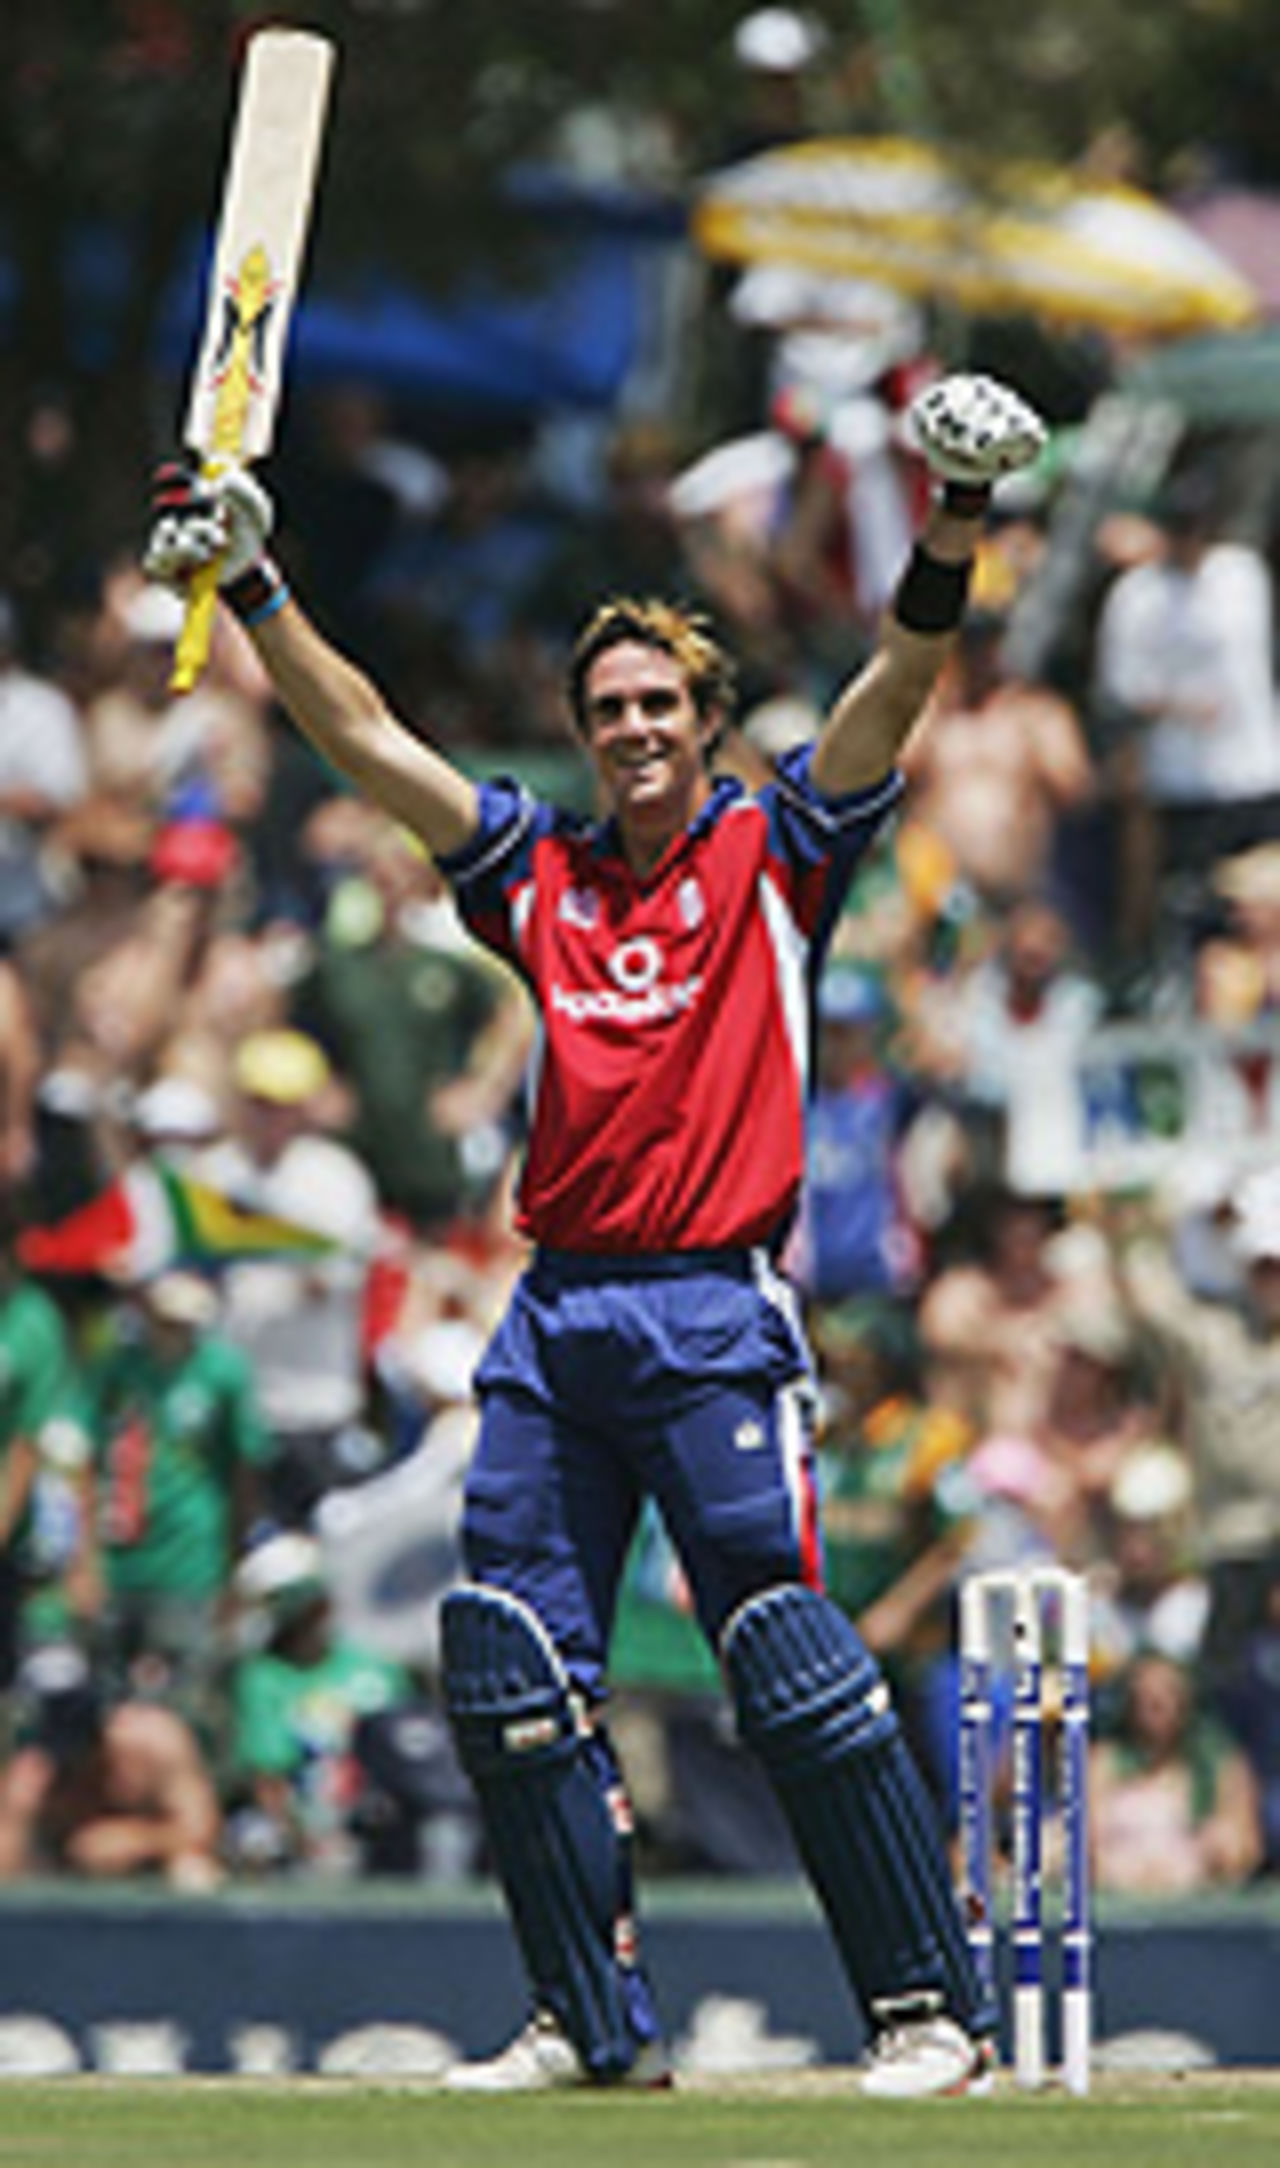 Kevin Pietersen celebrates his third century of the series, as England recover from a dreadful start at Centurion, South Africa v England, 7th ODI, February 13, 2005